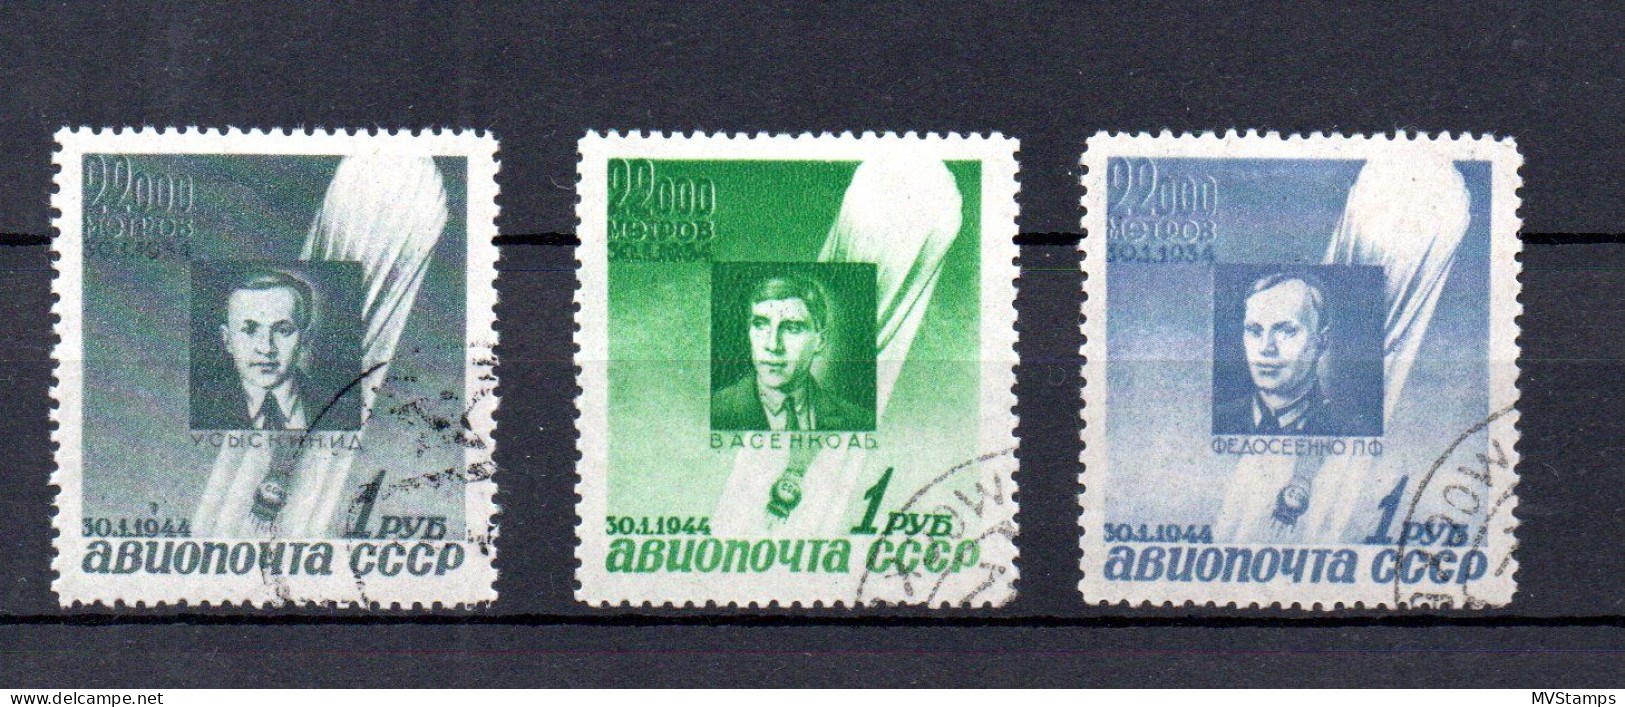 Russia 1944 Old Set Airmail Stratosphere Stamps (Michel 892/94) Nice Used - Used Stamps